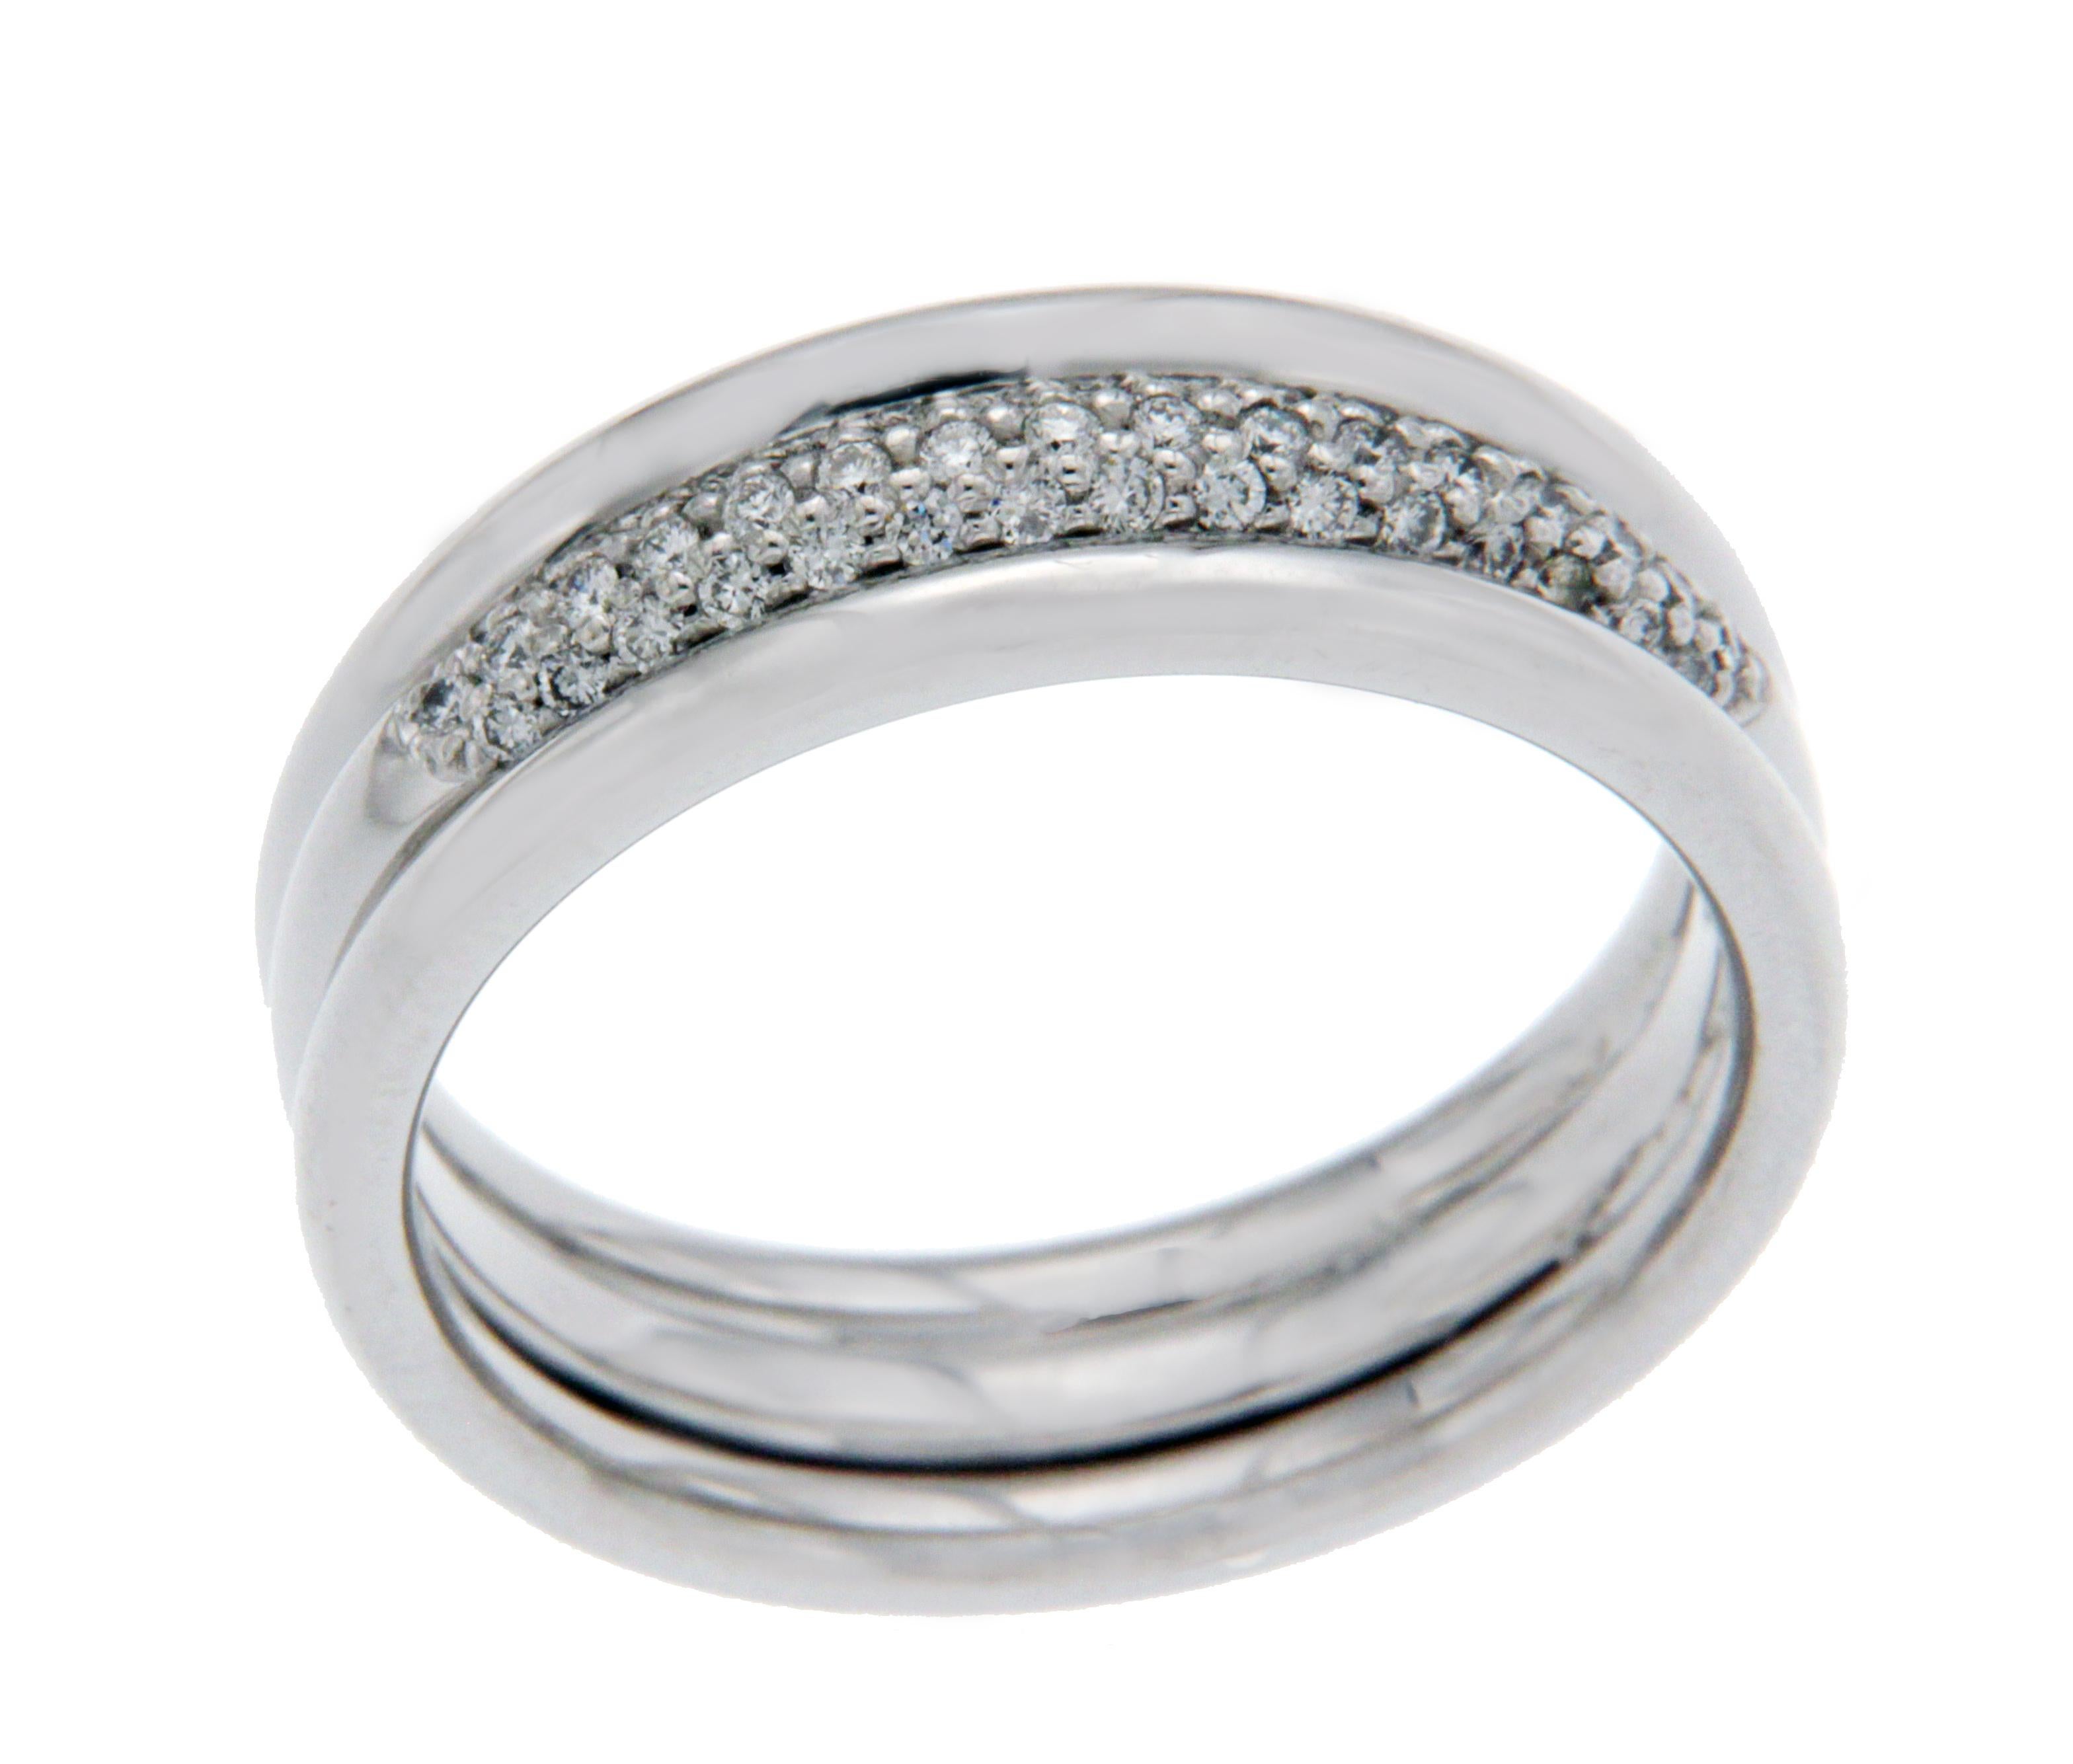 Type: Ring
Top: 6 mm
Band Width: 6 mm
Metal: Platinum
Metal Purity: 950
Hallmarks: Scott Kay Plat
Total Weight: 11.9 Gram
Stone Type: Diamond 
Condition: Pre Owned
Stock Number: U48